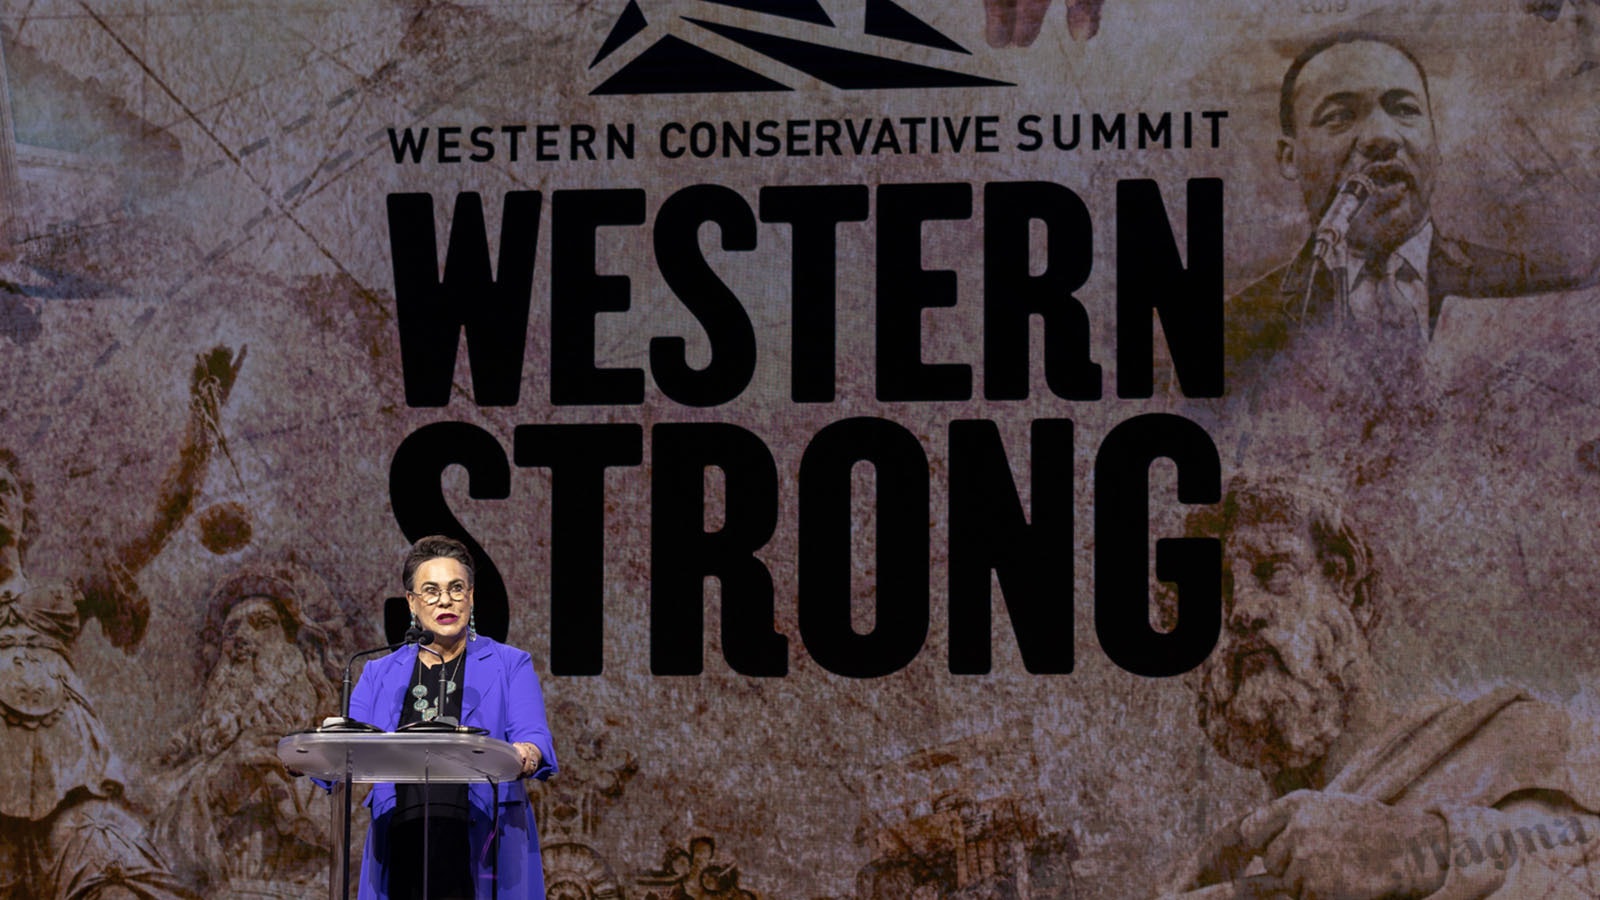 U.S. Rep. Harriet Hageman, R-Wyoming, drew the loudest applause from a crowd of about 200 conservatives Friday speaking at the Western Conservative Summit in Denver.